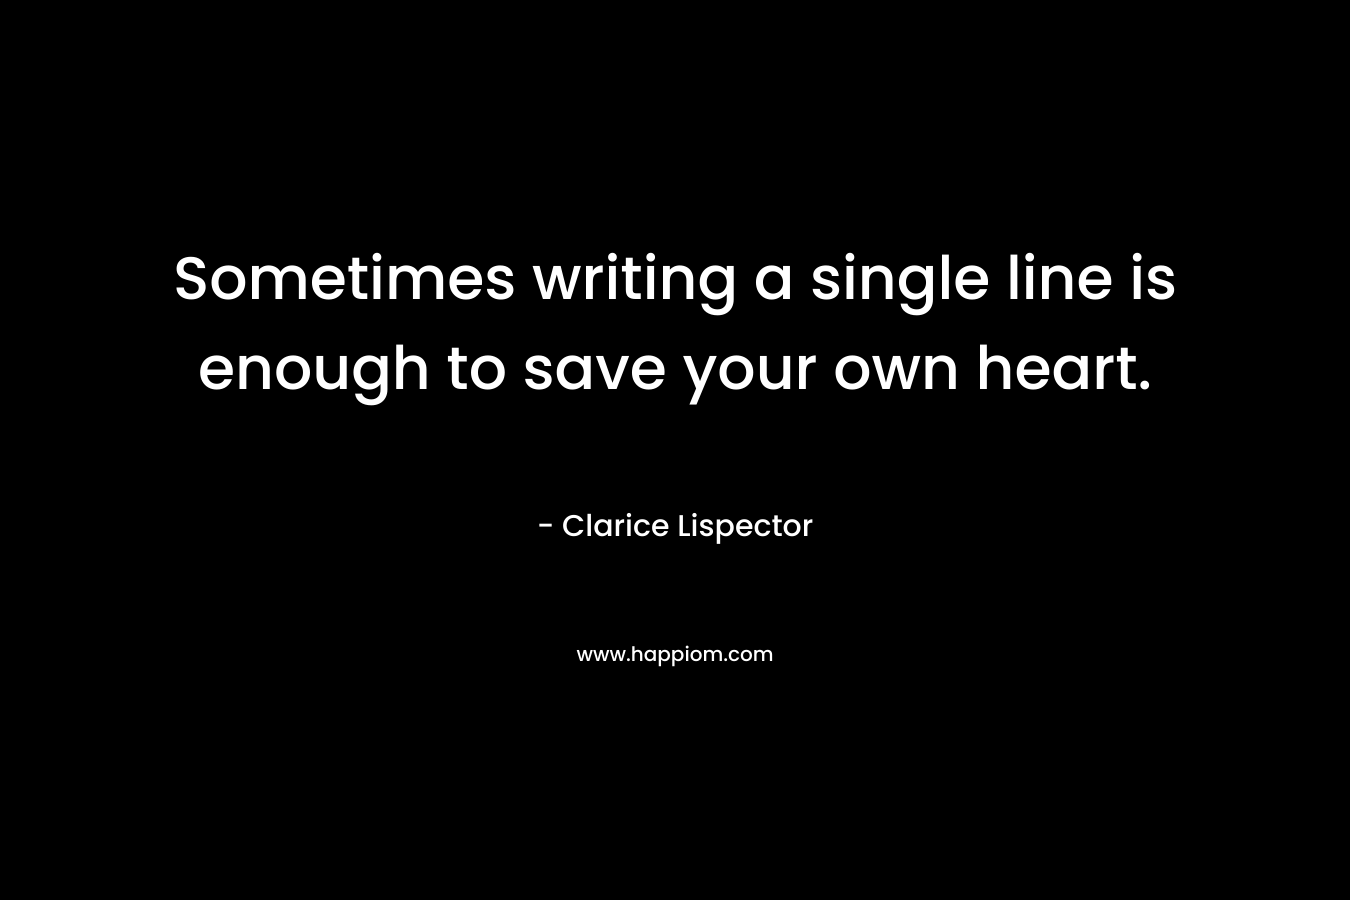 Sometimes writing a single line is enough to save your own heart.